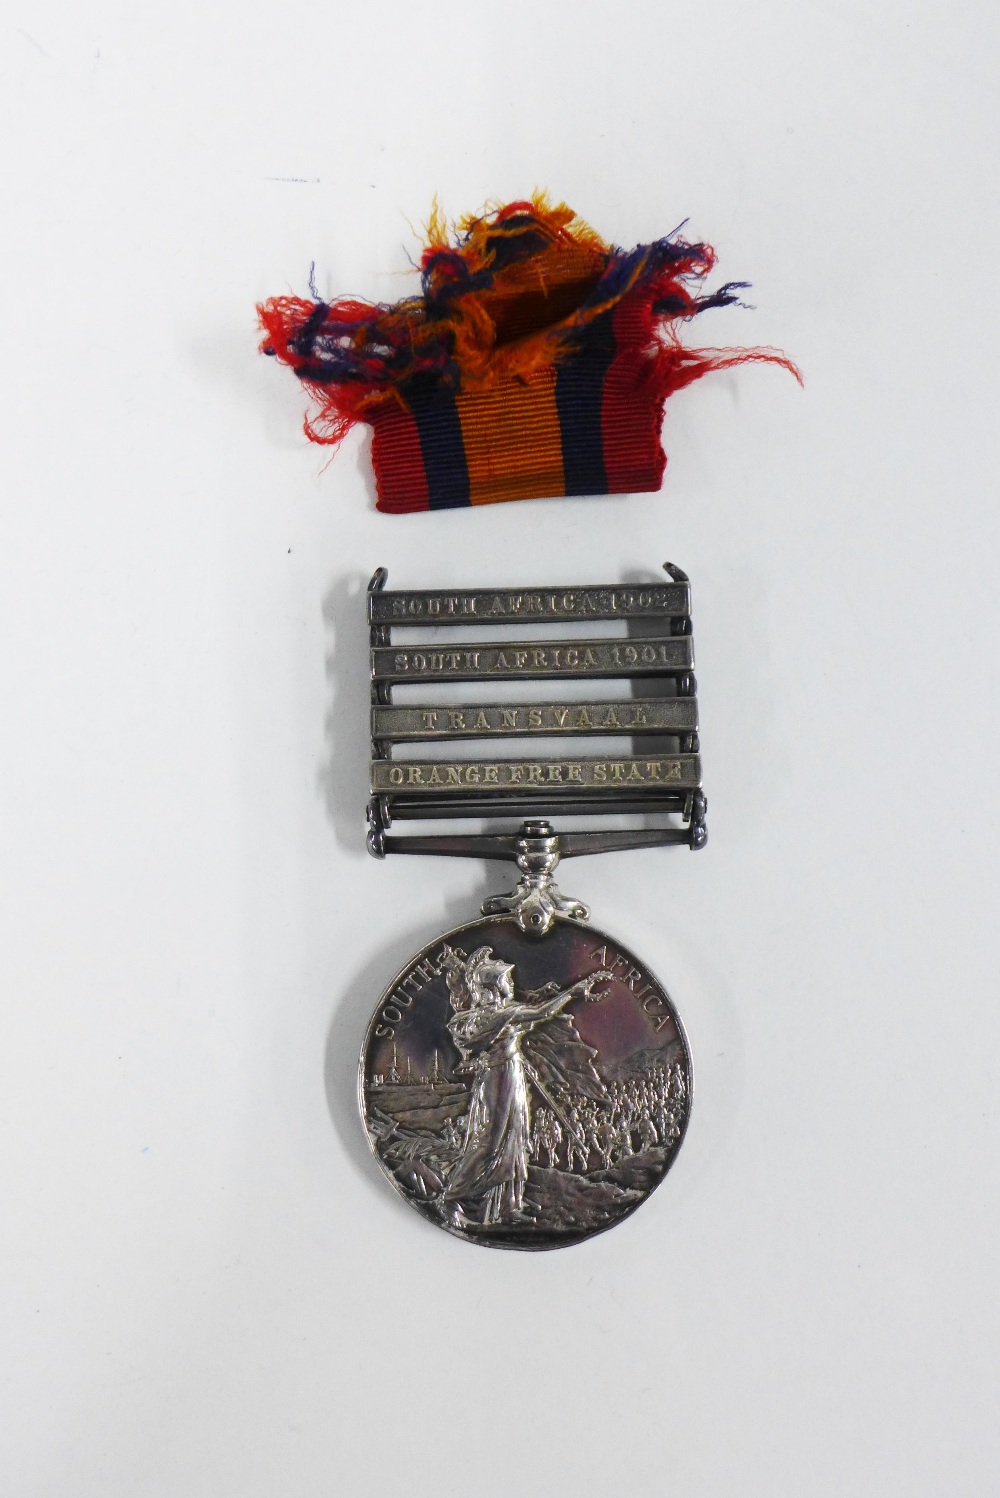 Queen Victoria South Africa medal awarded to 5814 Pte A Mitchell, RL Highlanders, with Transvaal, - Image 2 of 5